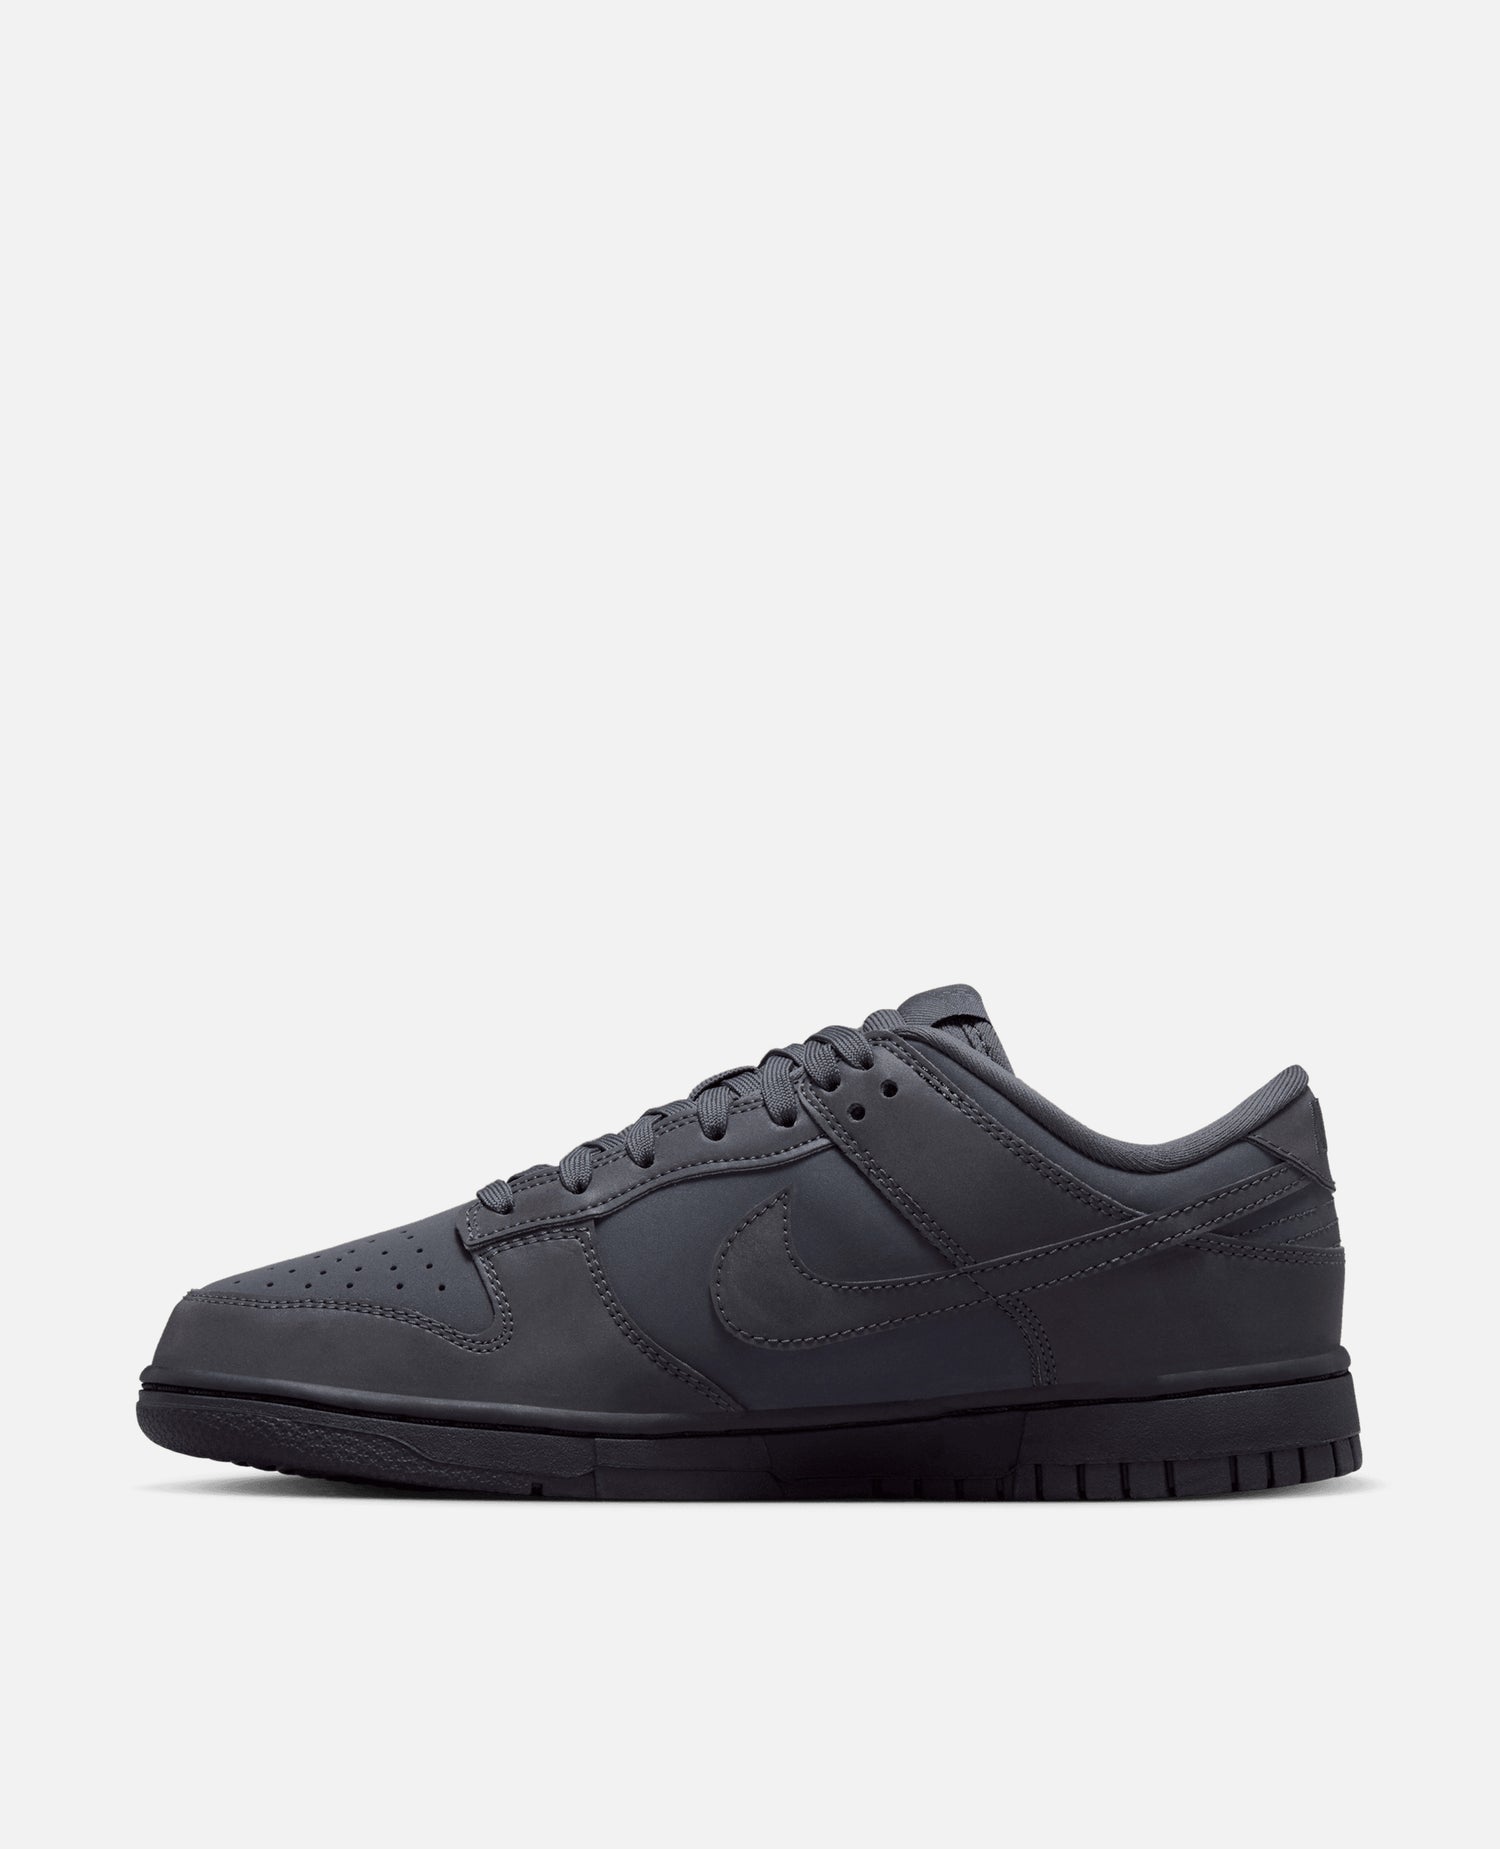 Nike WMNS Dunk Low (Anthracite/Black-Racer Blue)